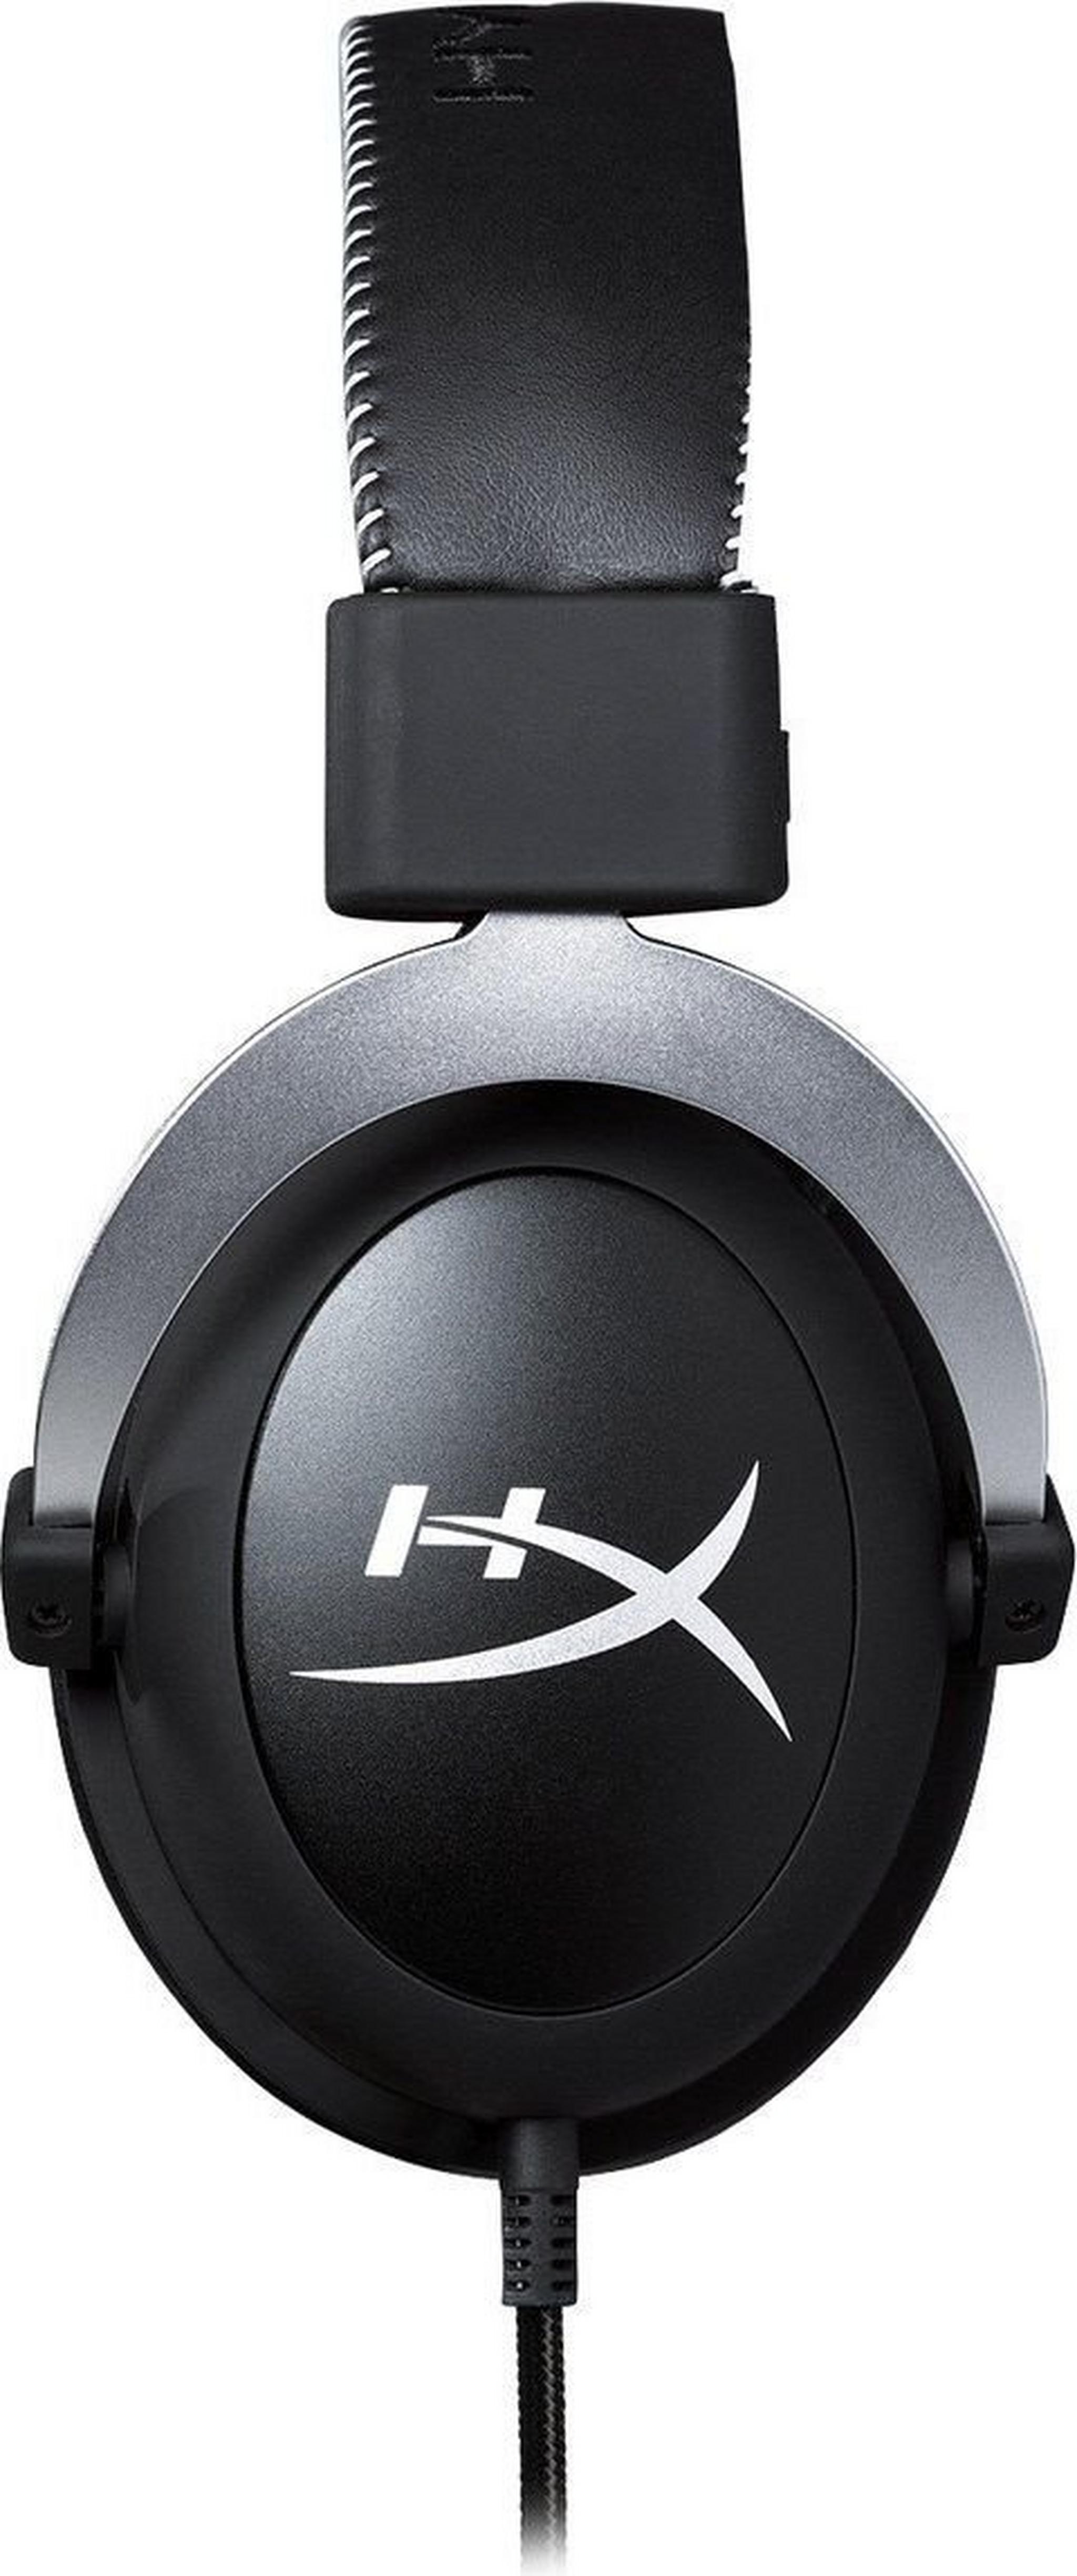 HyperX CloudX XBOX Licensed Gaming Headset